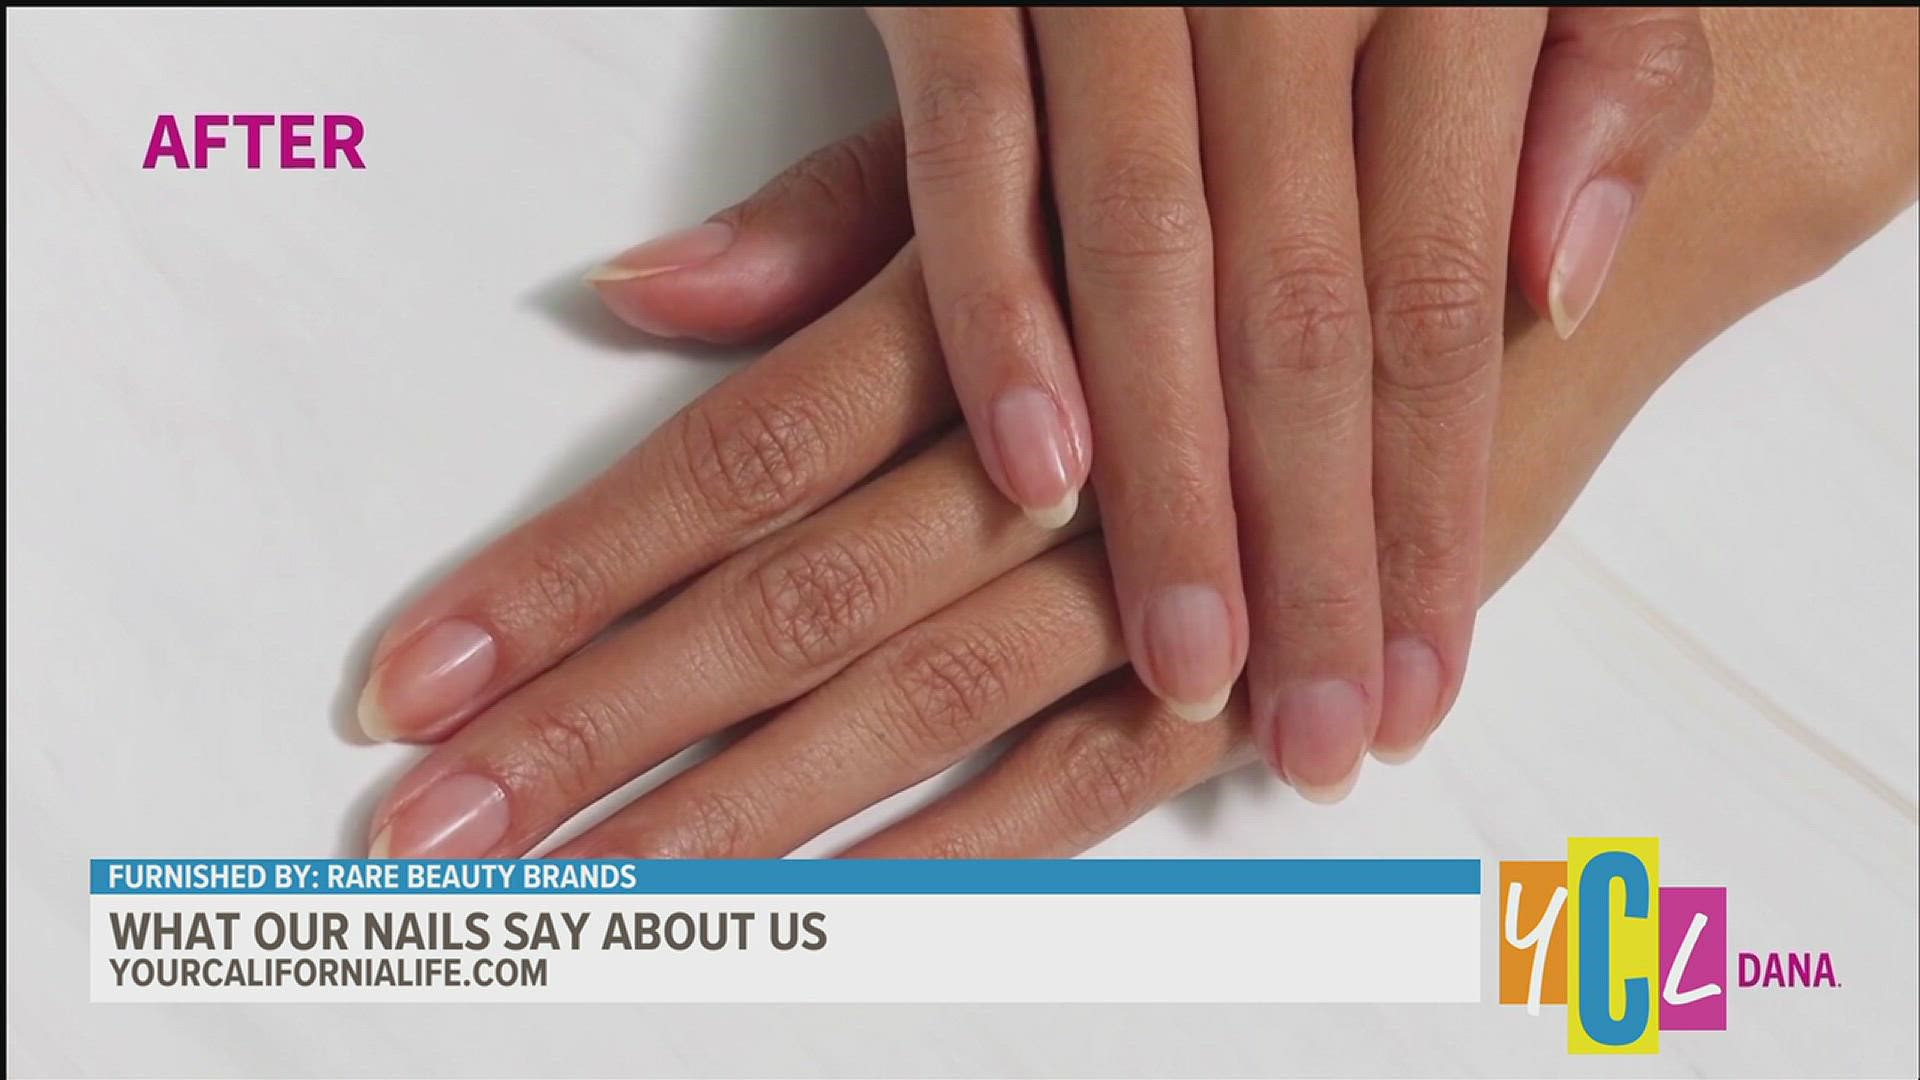 We're debunking myths when it comes to our manicures and what the condition of our nails says about our health.